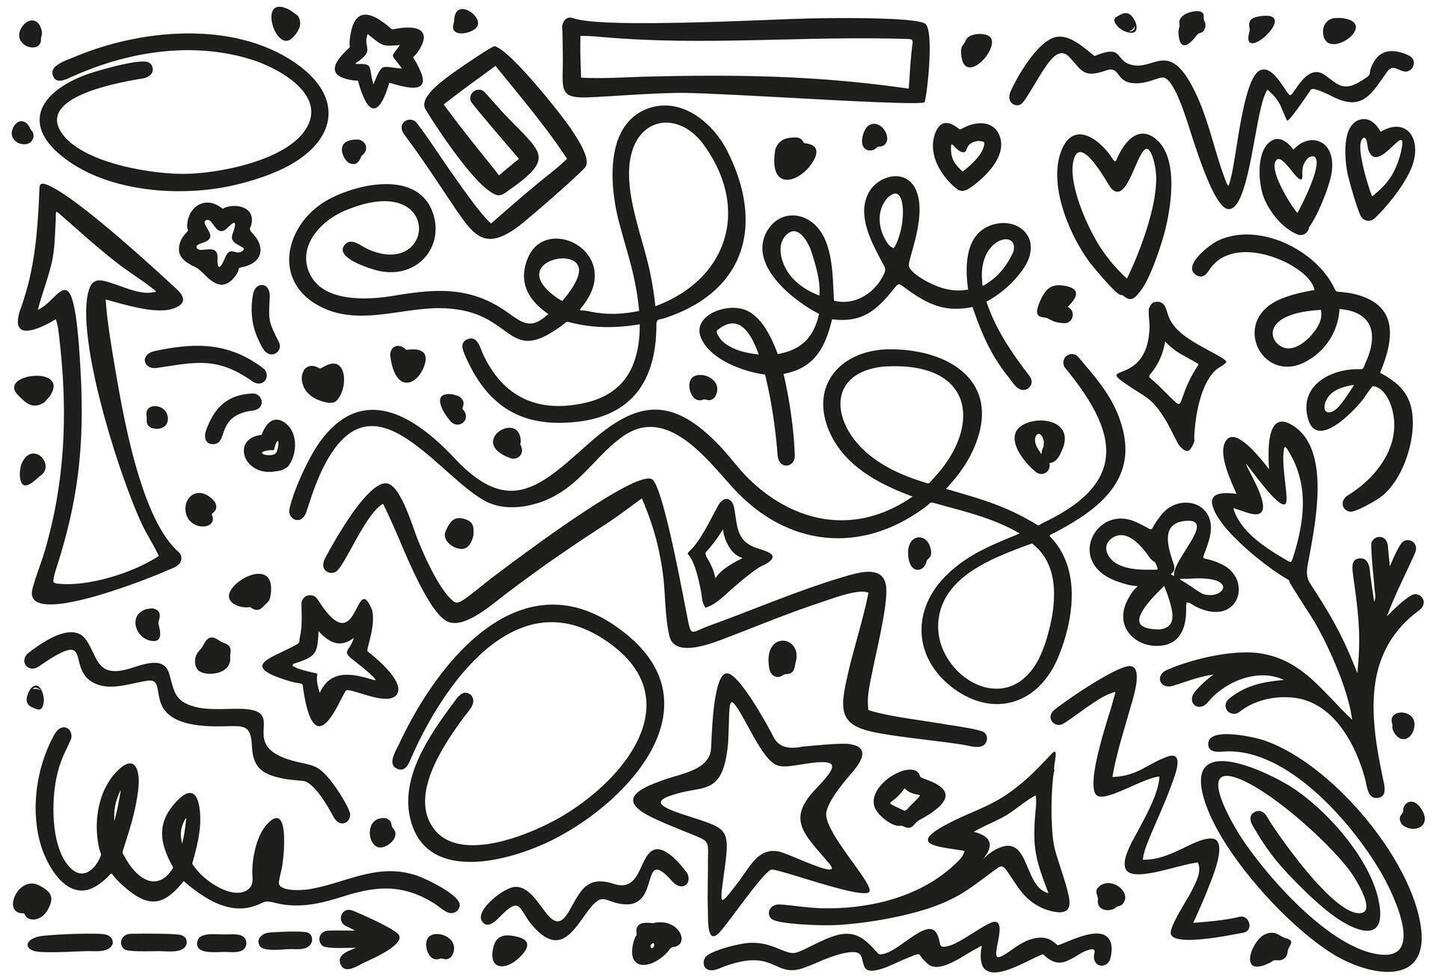 Doodle elements collection. Monochrome isolated set vector